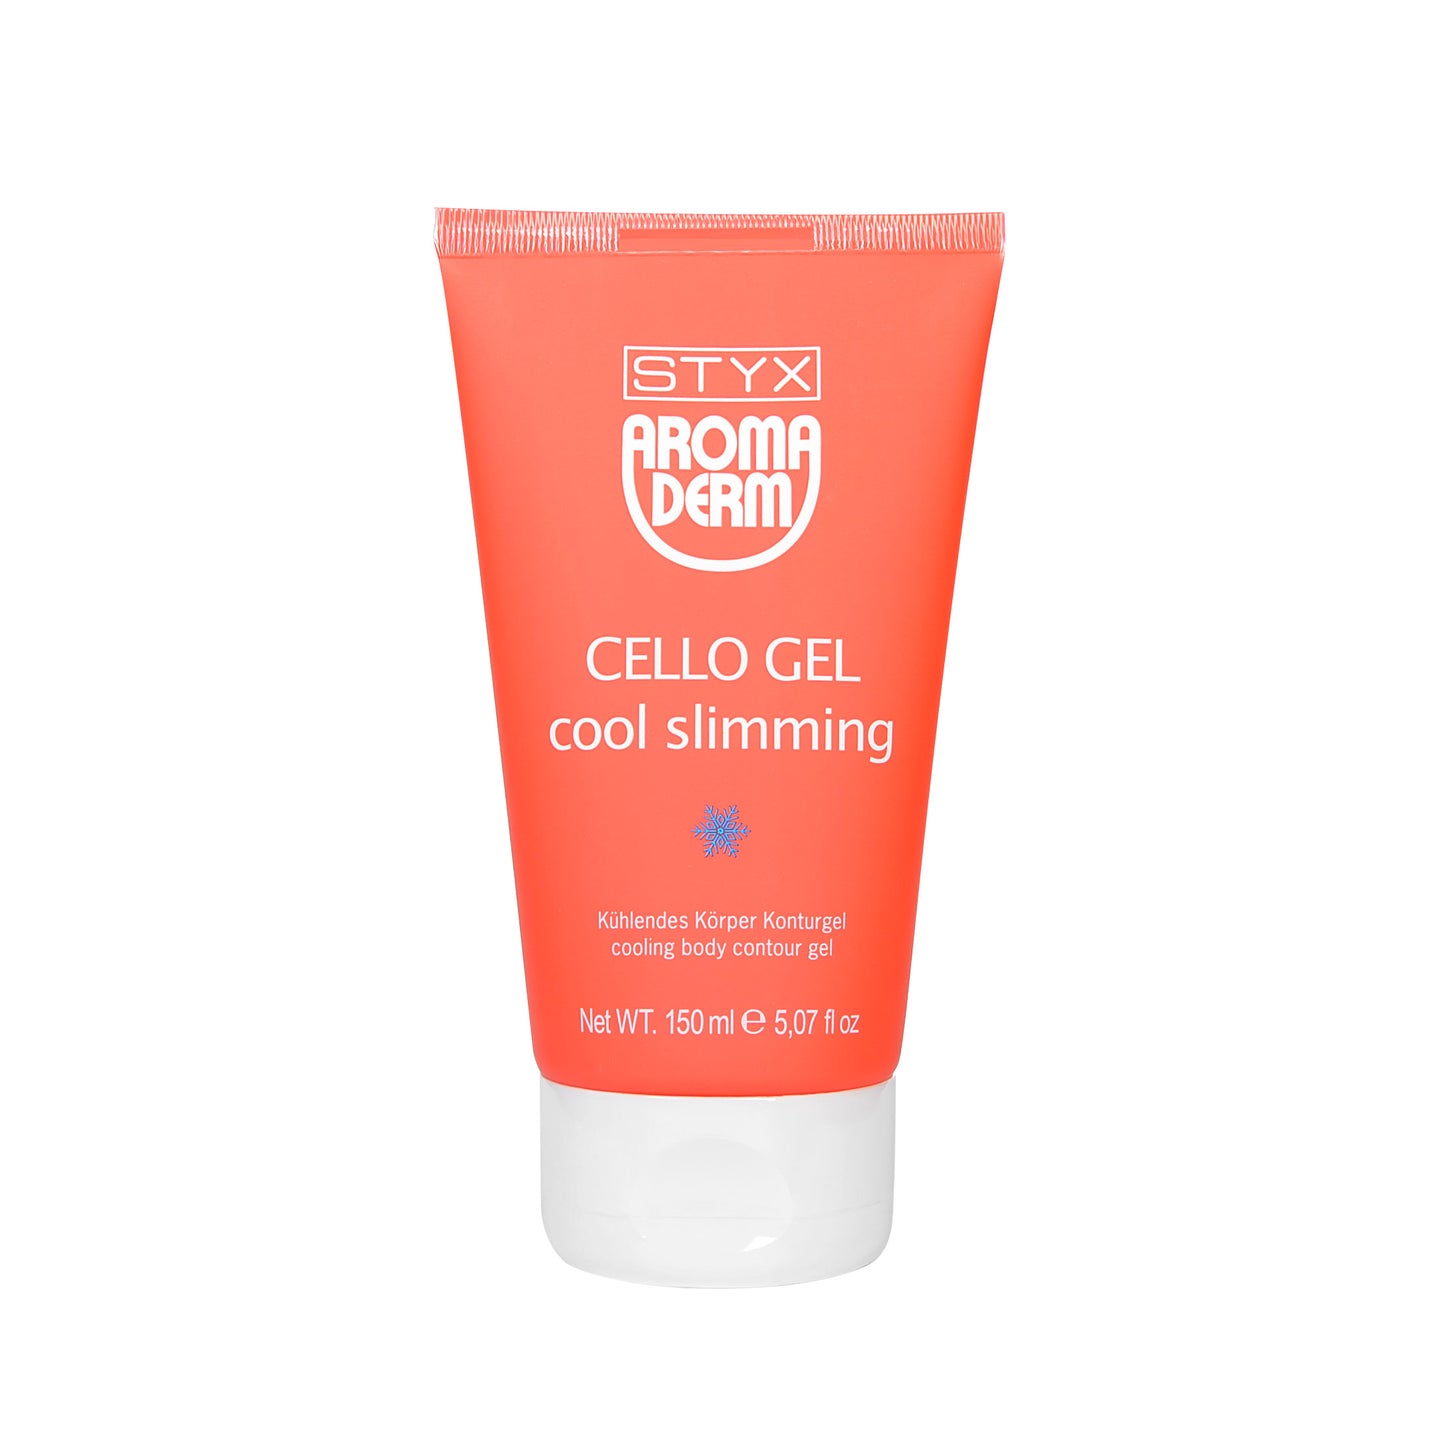 CELLO GEL COOL SLIMMING